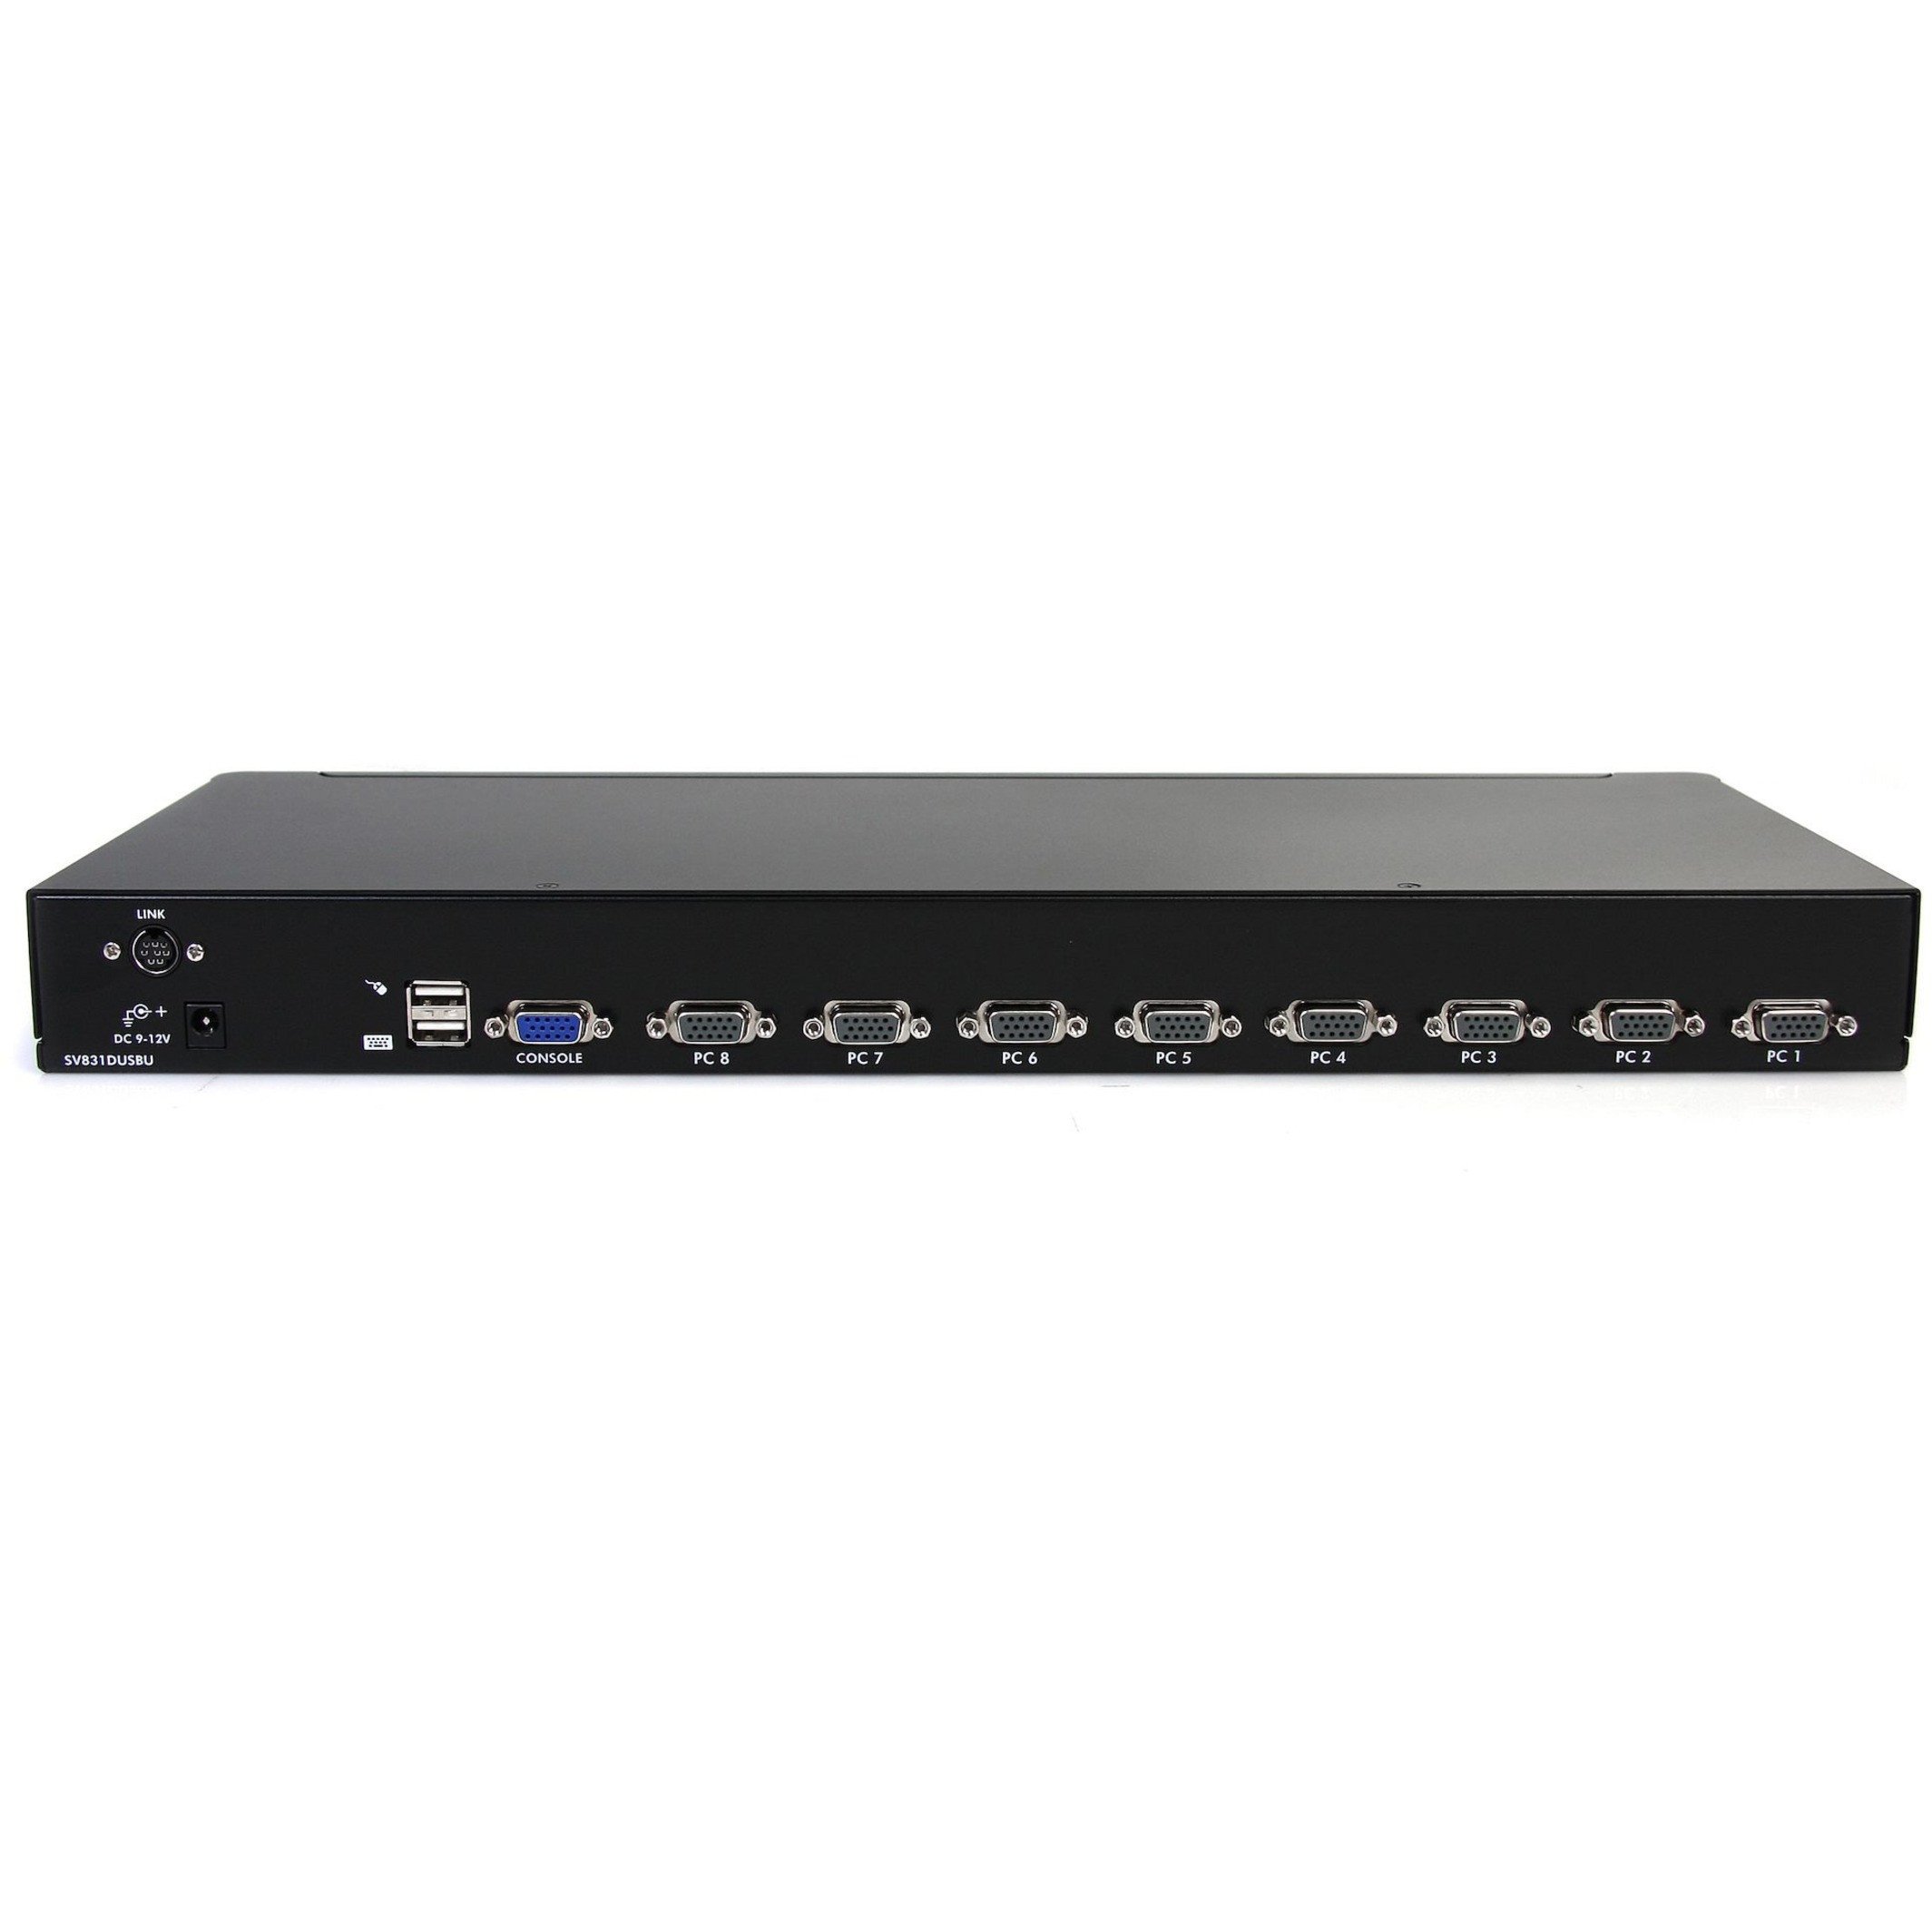 Startech .com 8 Port 1U Rackmount USB KVM Switch with OSDControl up to 8 VGA and USB computers from a single keyboard, mouse and monitor -… SV831DUSBU